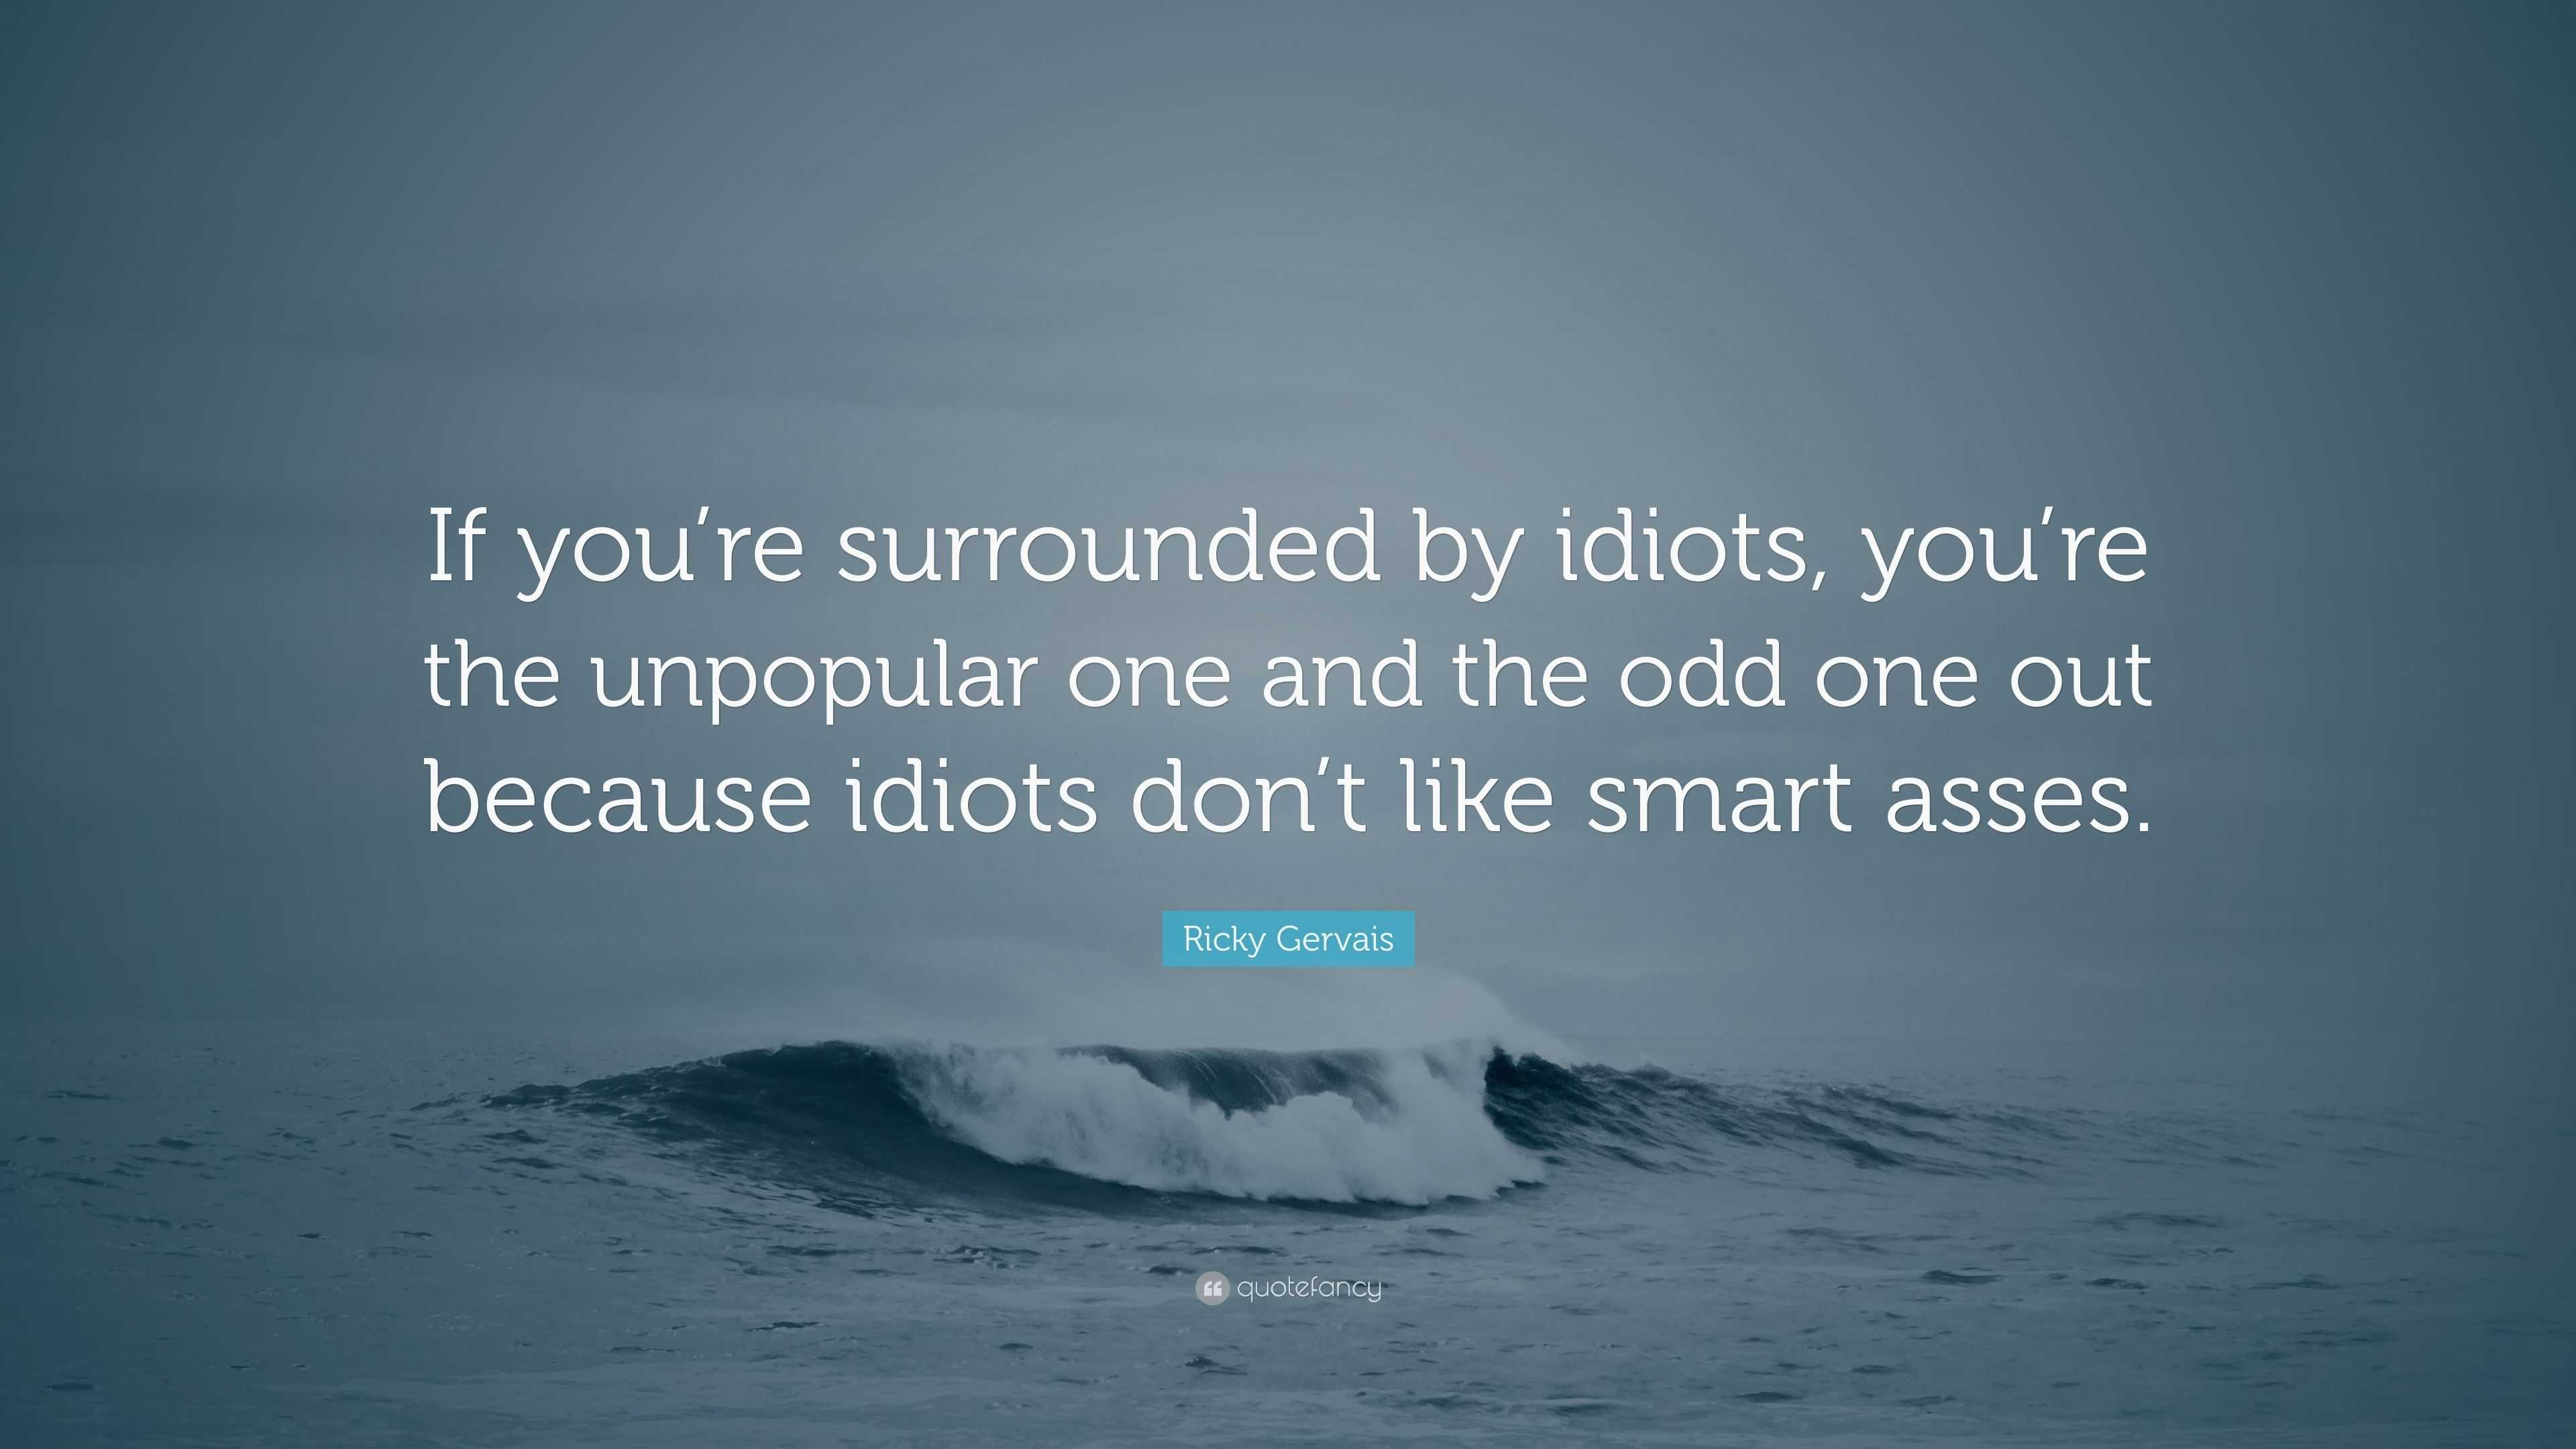 how to cope when you are surrounded by idiots